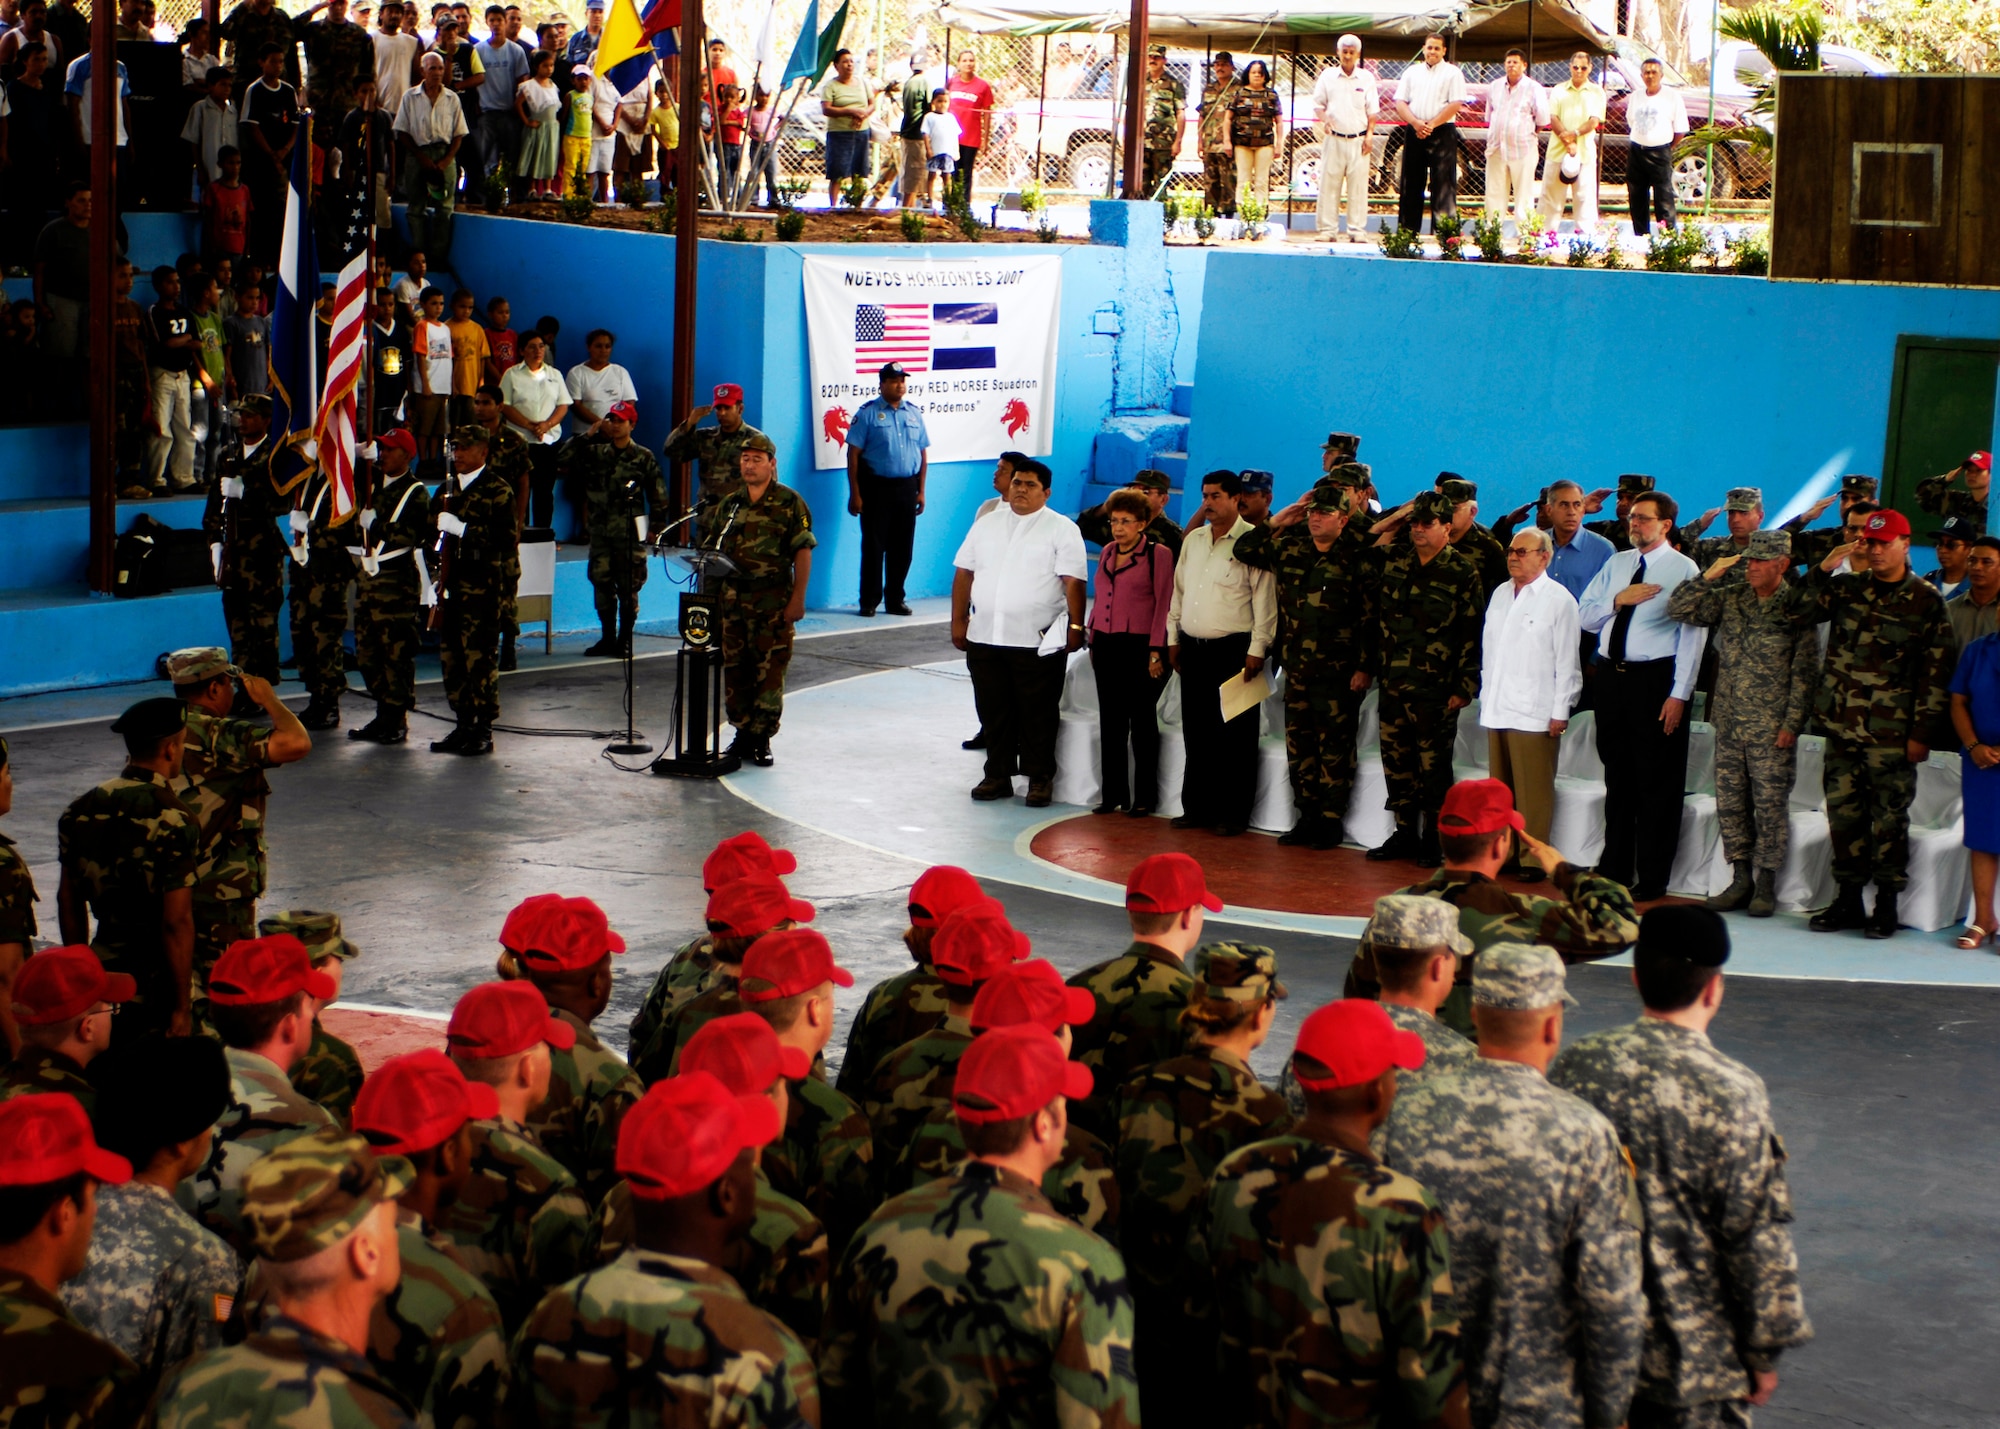 New Horizons - Nicaragua 2007 closing ceremony attendants render courtesies to the United States and Nicaraguan flags April 27. The ceremony concluded the $7.5 million joint humanitarian and training exercise, during which 250 Airmen, Soldiers and Marines built a three-room school and a five-room medical clinic and treated more than 20,000 Nicaraguan medical patients. (U.S. Air Force photo/Staff Sgt. Jason Bailey)